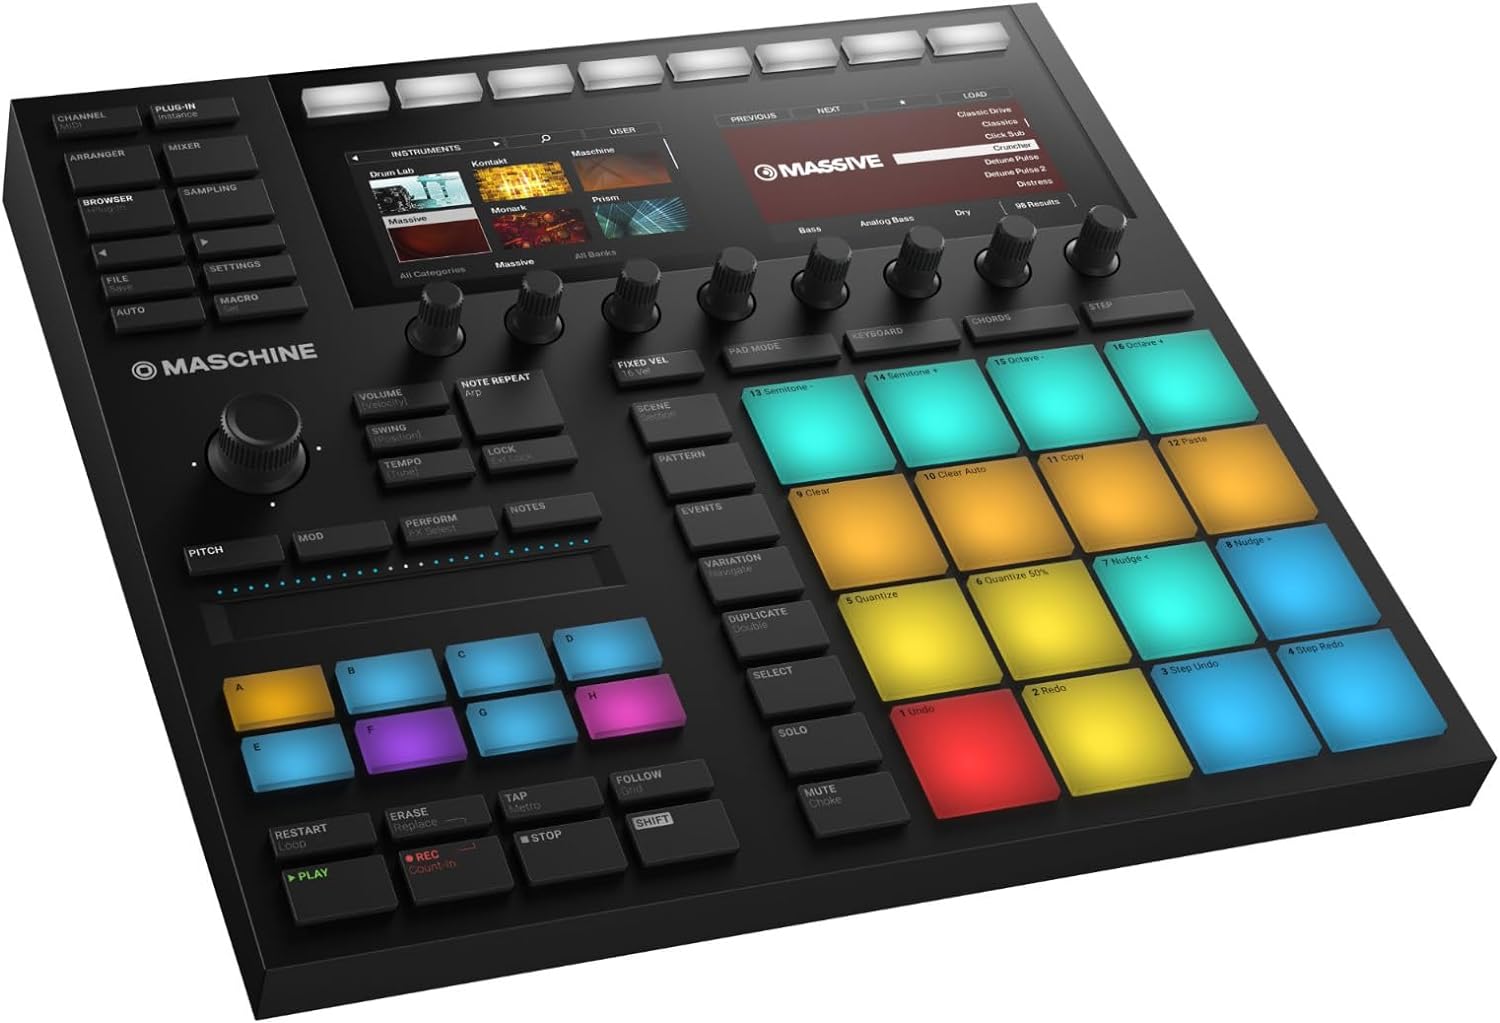 Native Instruments Maschine Mk3 Drum Controller Review - The Best Drum Controller for Music Producers